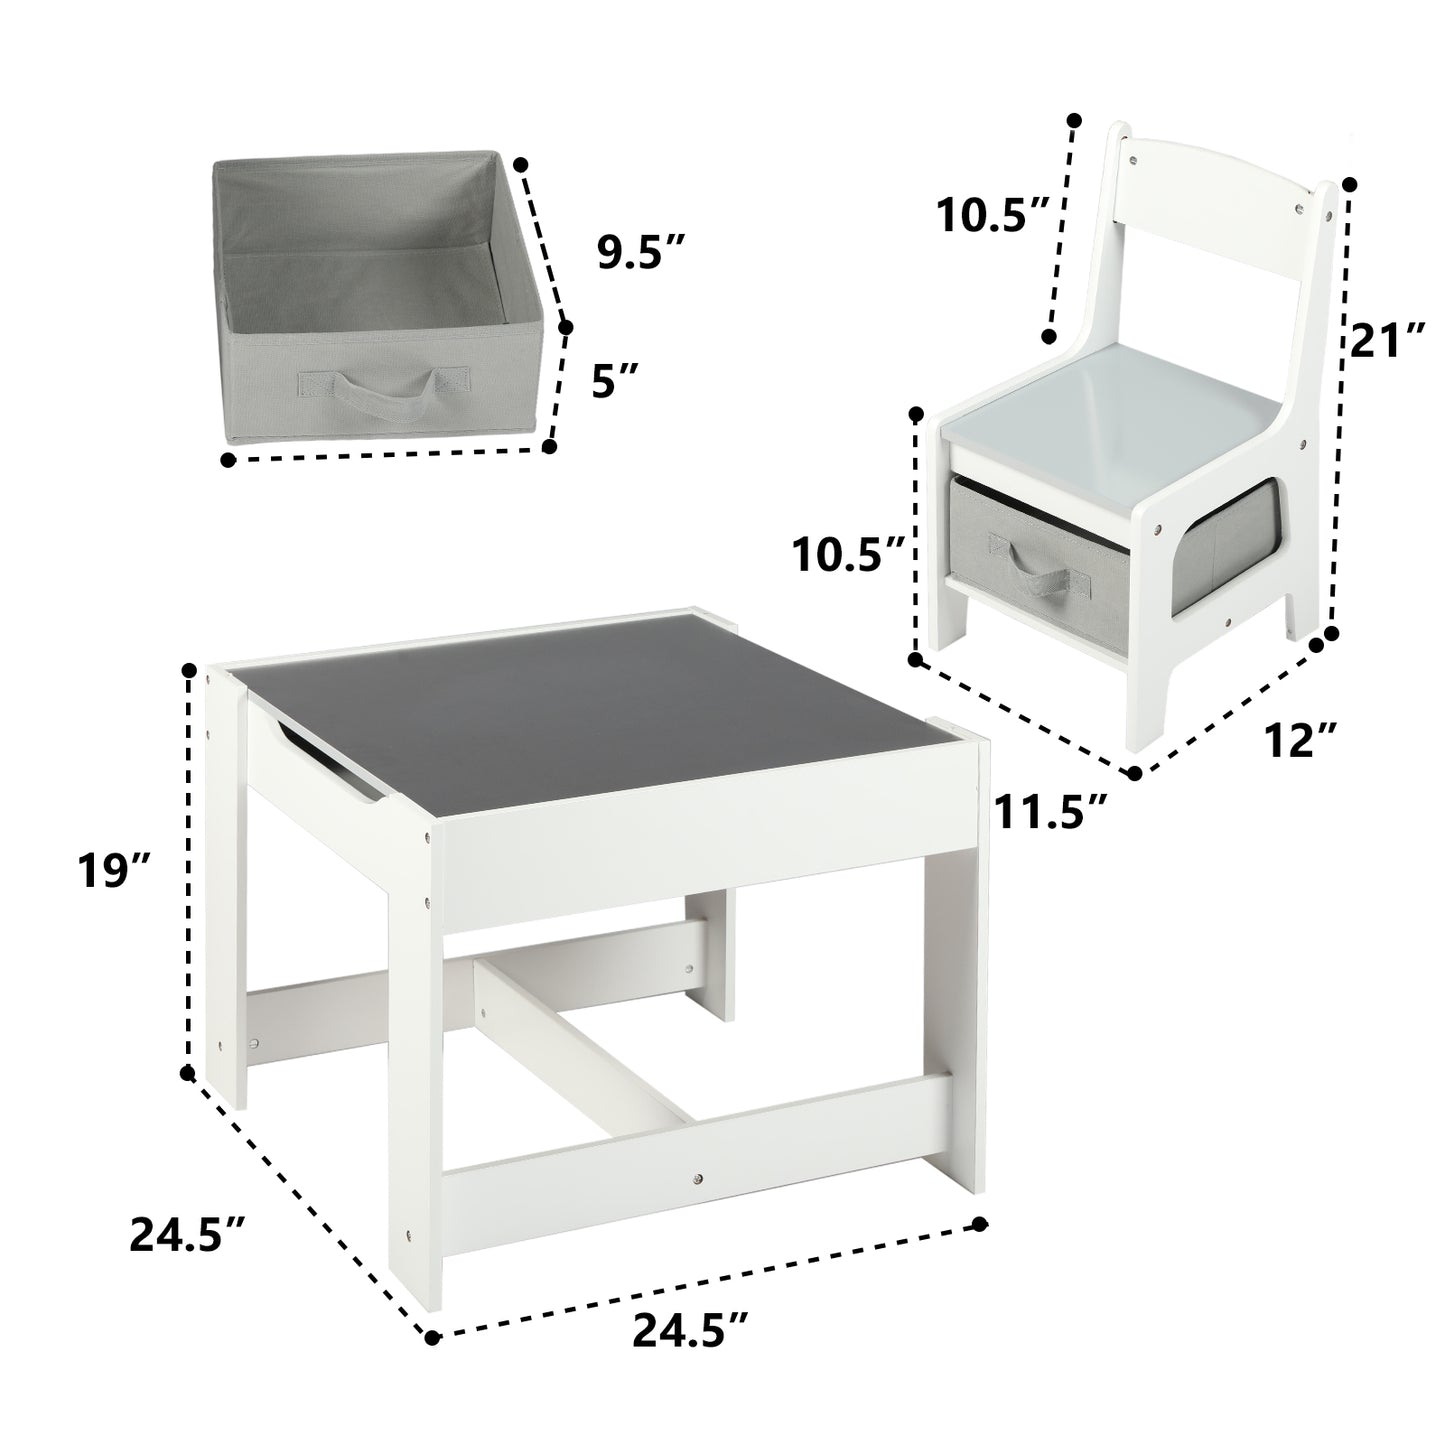 3 in 1 Kids Wood Table & 2 Chairs Set, Children Activity Table w/Storage, Grey